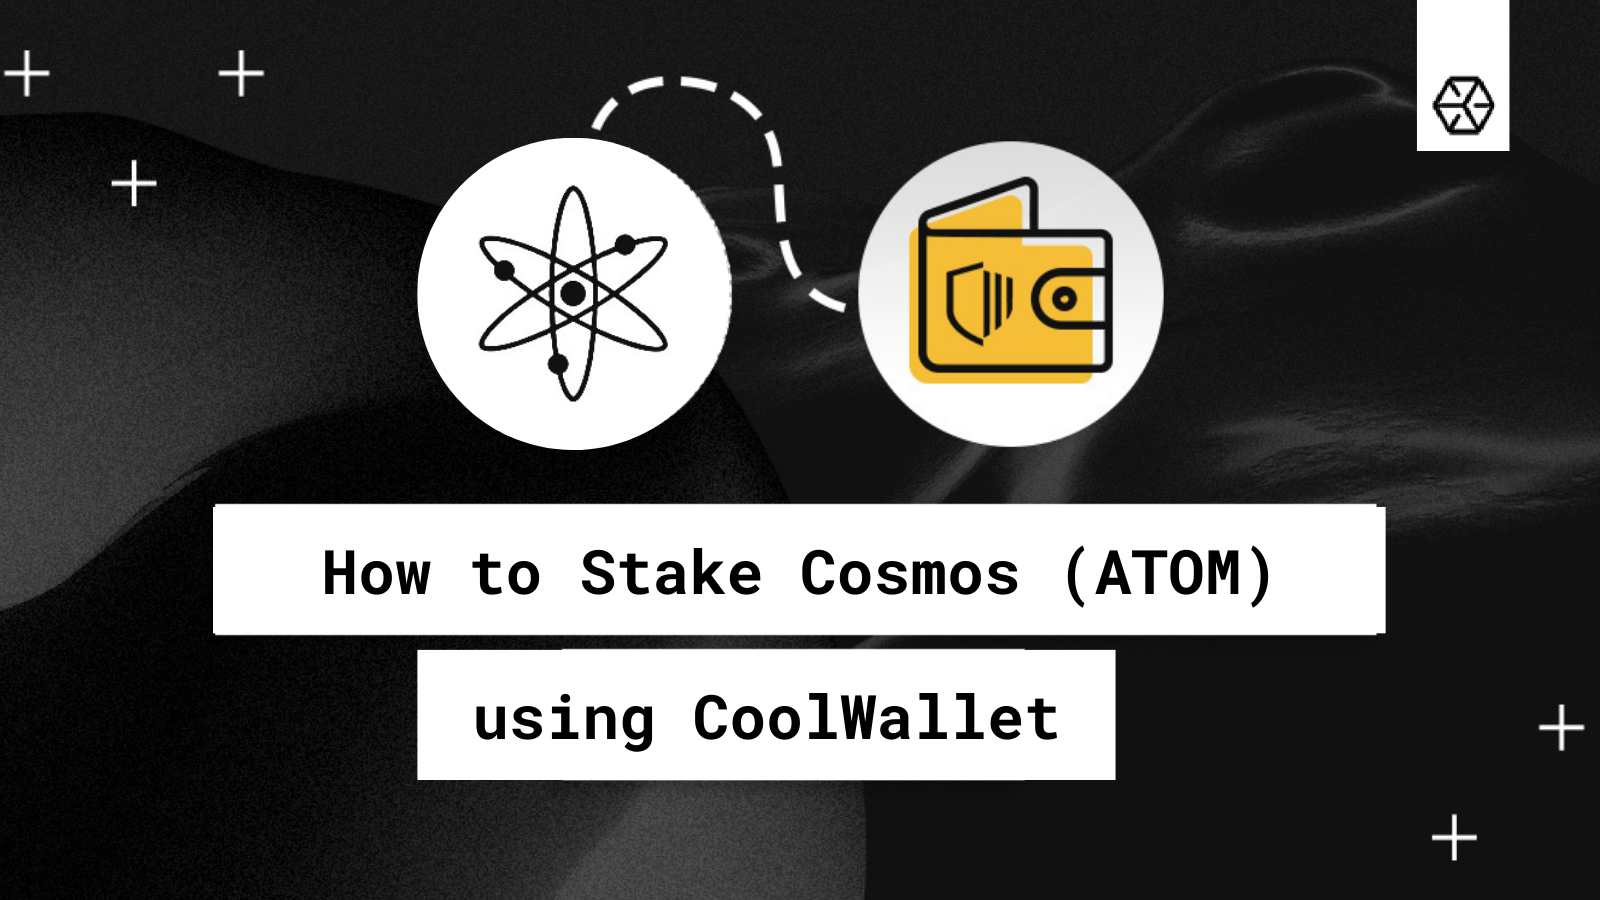 How to Stake Cosmos (ATOM) using CoolWallet